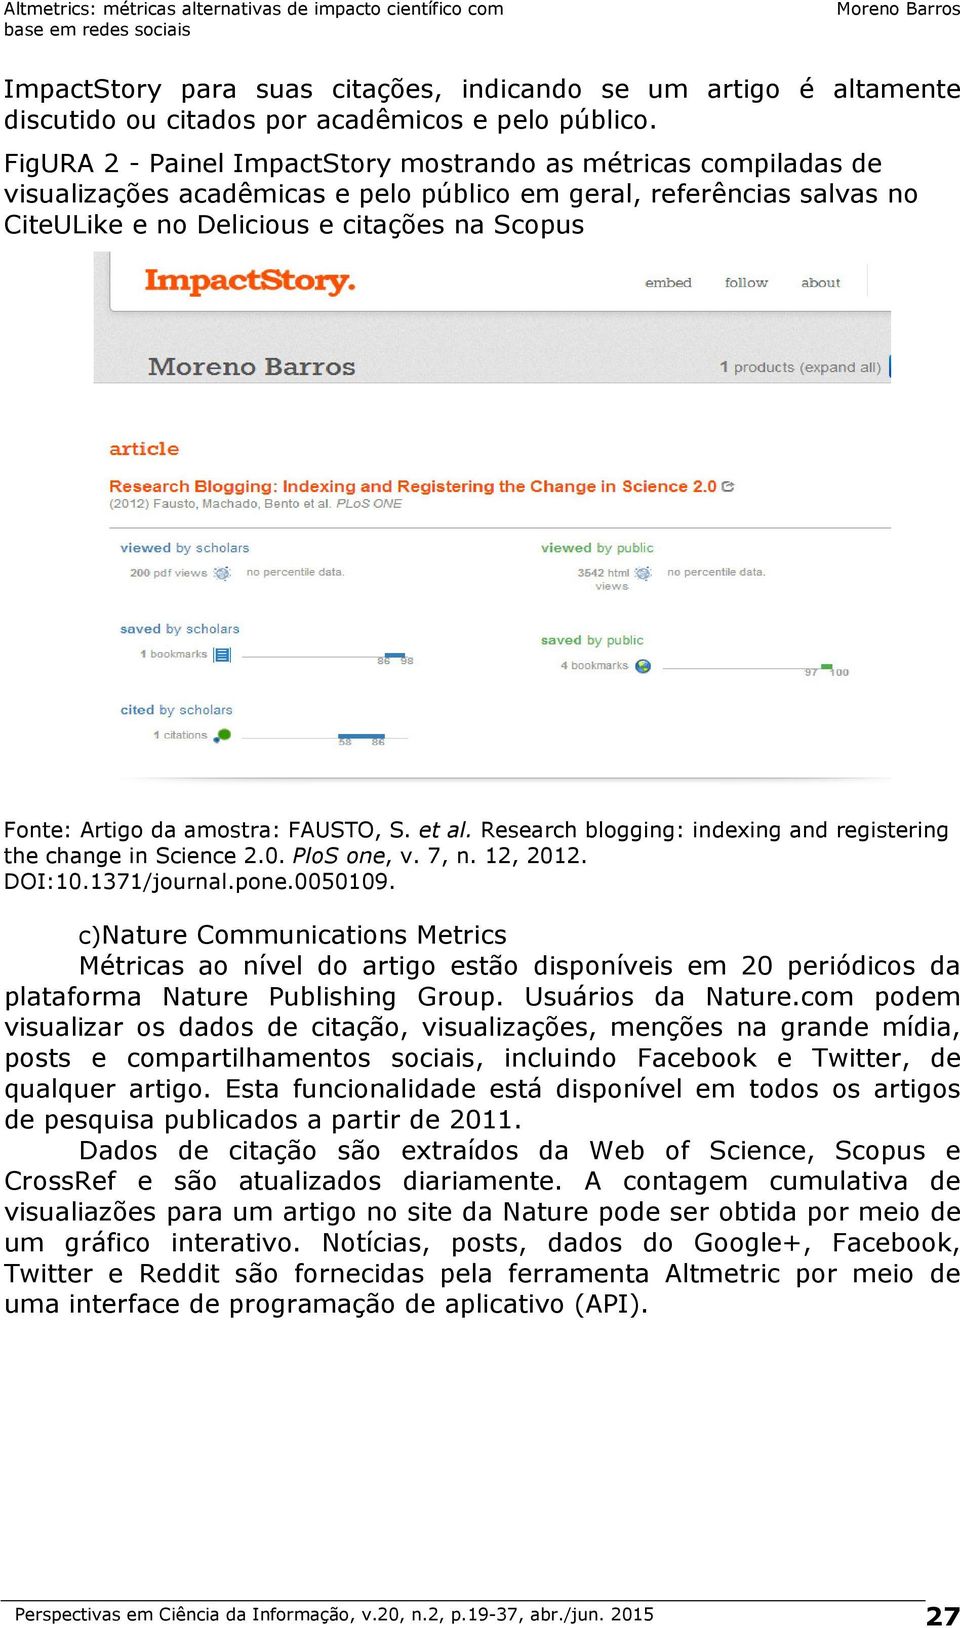 da amostra: FAUSTO, S. et al. Research blogging: indexing and registering the change in Science 2.0. PloS one, v. 7, n. 12, 2012. DOI:10.1371/journal.pone.0050109.